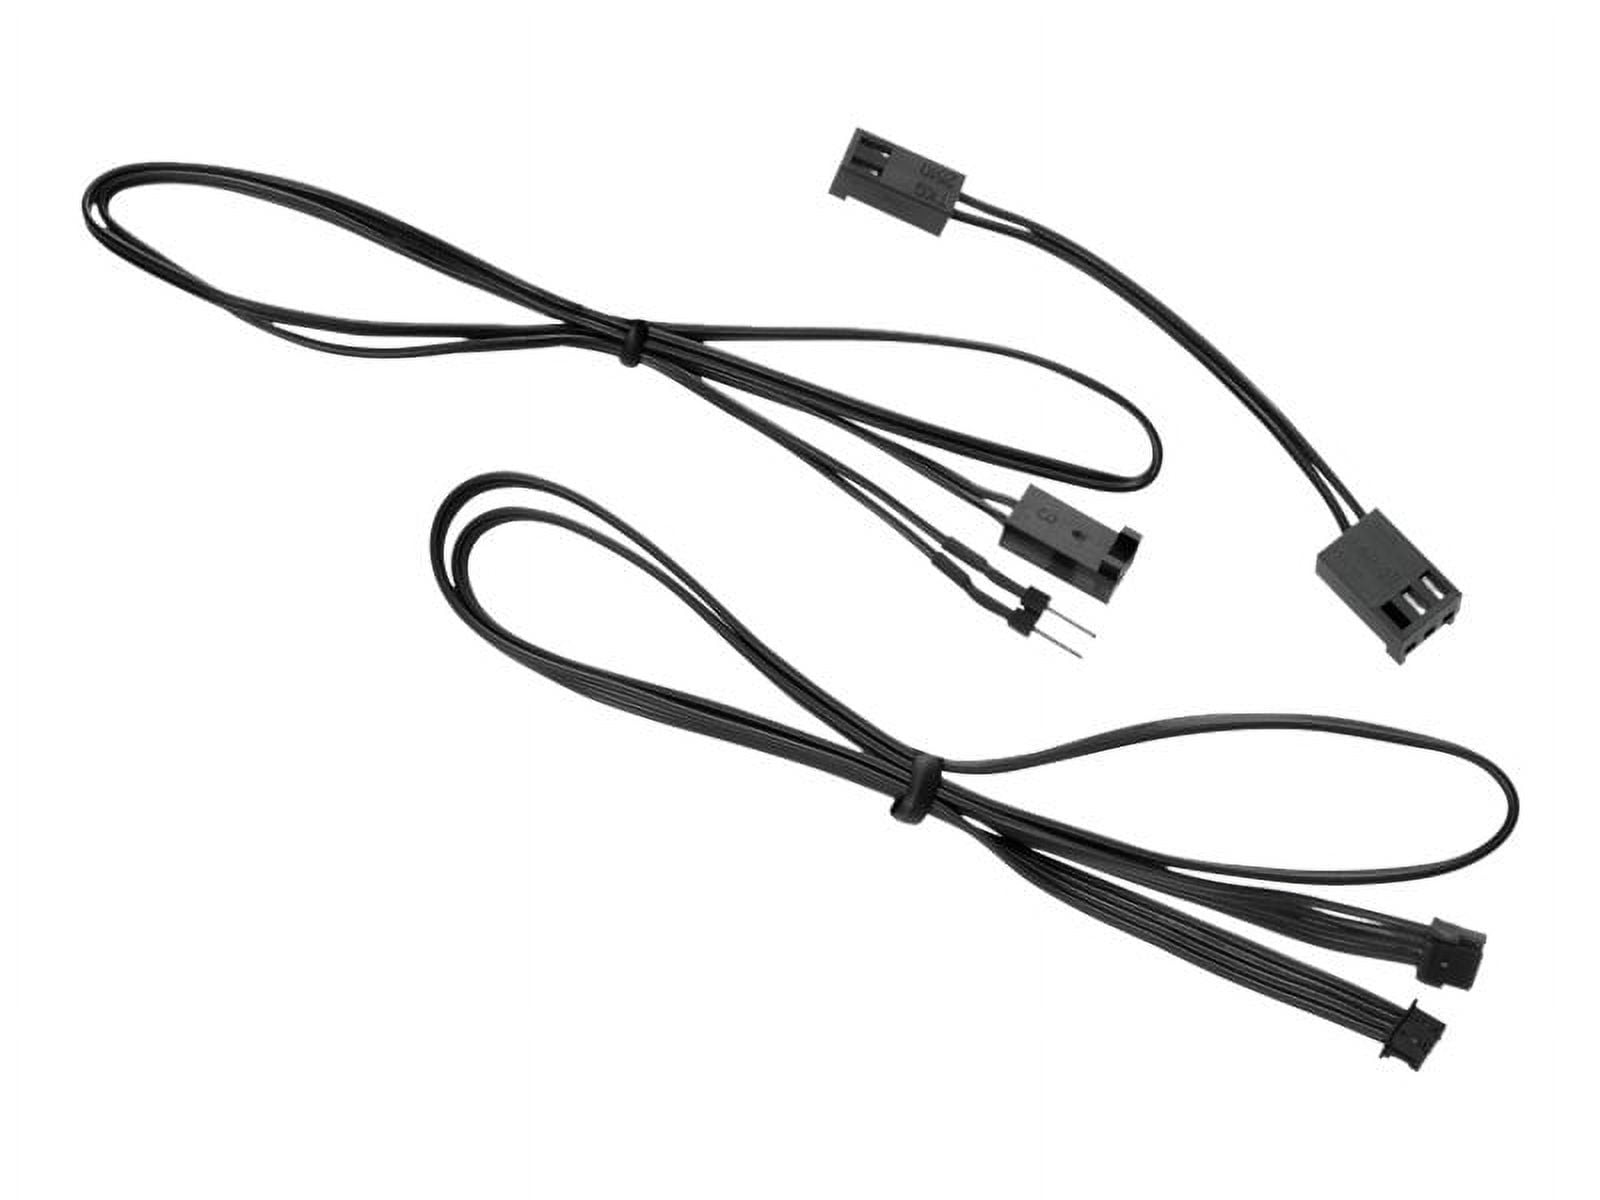 CORSAIR Link Accessory Kit - Fan speed controller cable kit